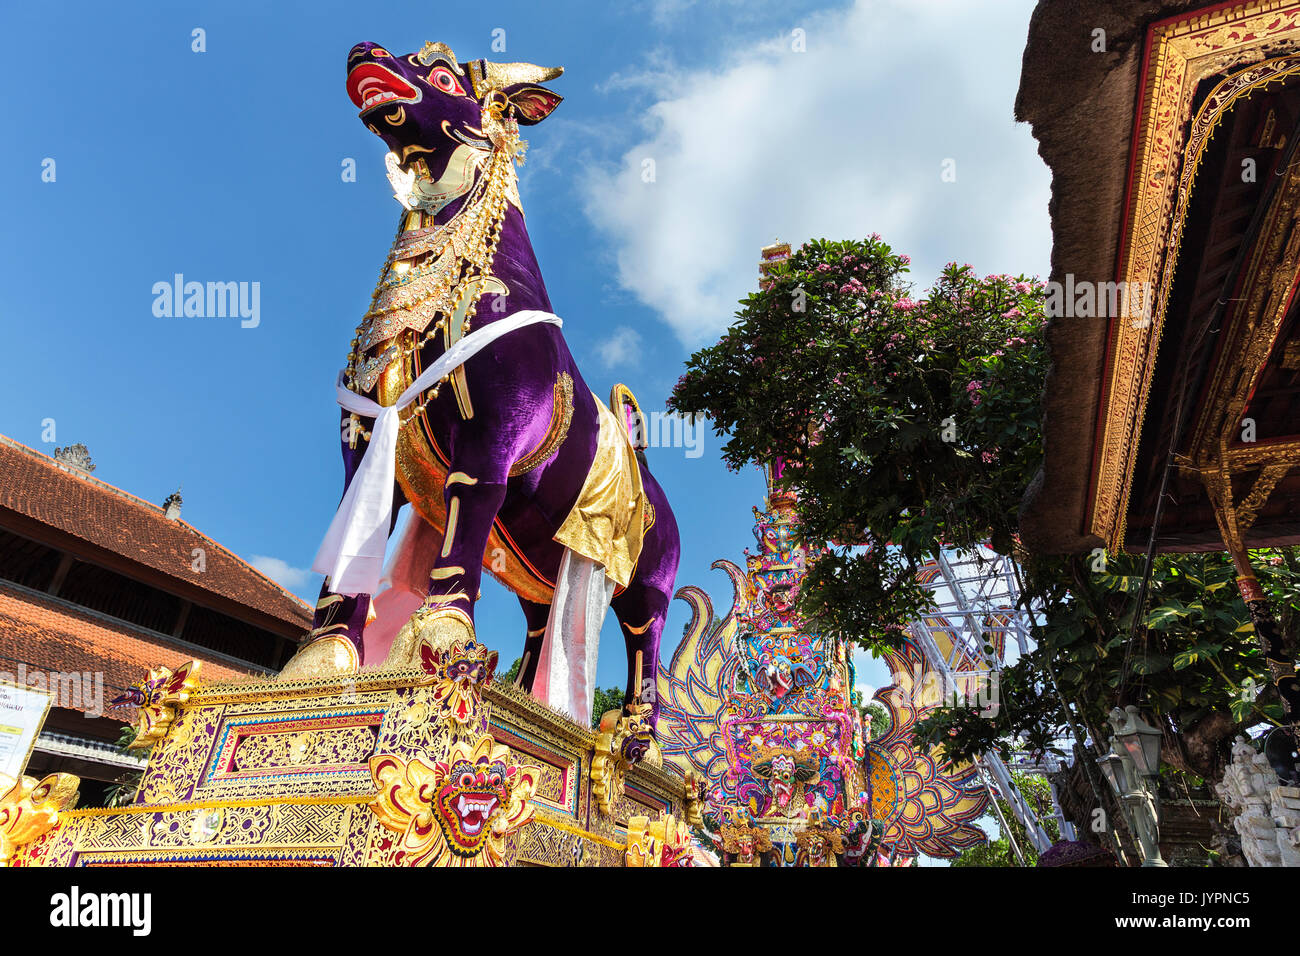 Statue of bull and spectacular decorations for a Royal Cremation, Ubud, Bali, Indonesia Stock Photo